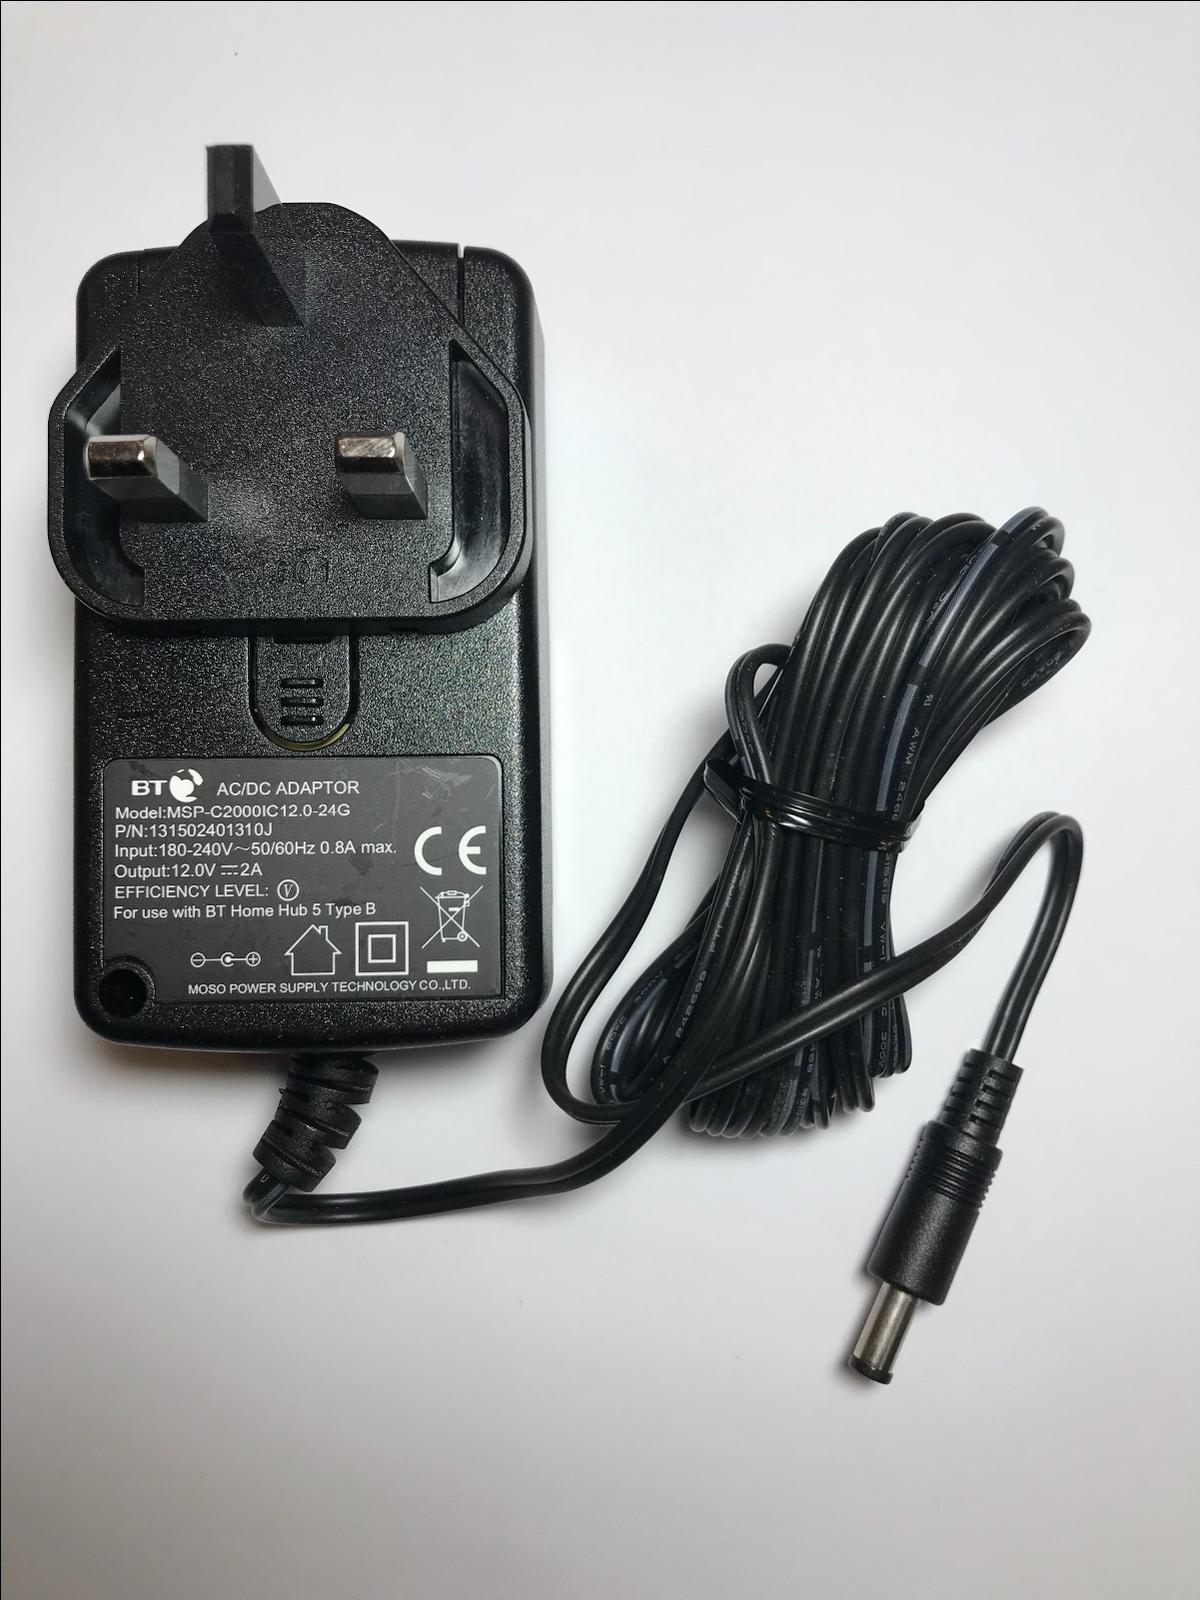 KENWOOD Ac Adapter WO8-1251 12VDC 0.85A Power Supply This Top Quality Brand New UK Mains AC-DC Switching Adaptor Power